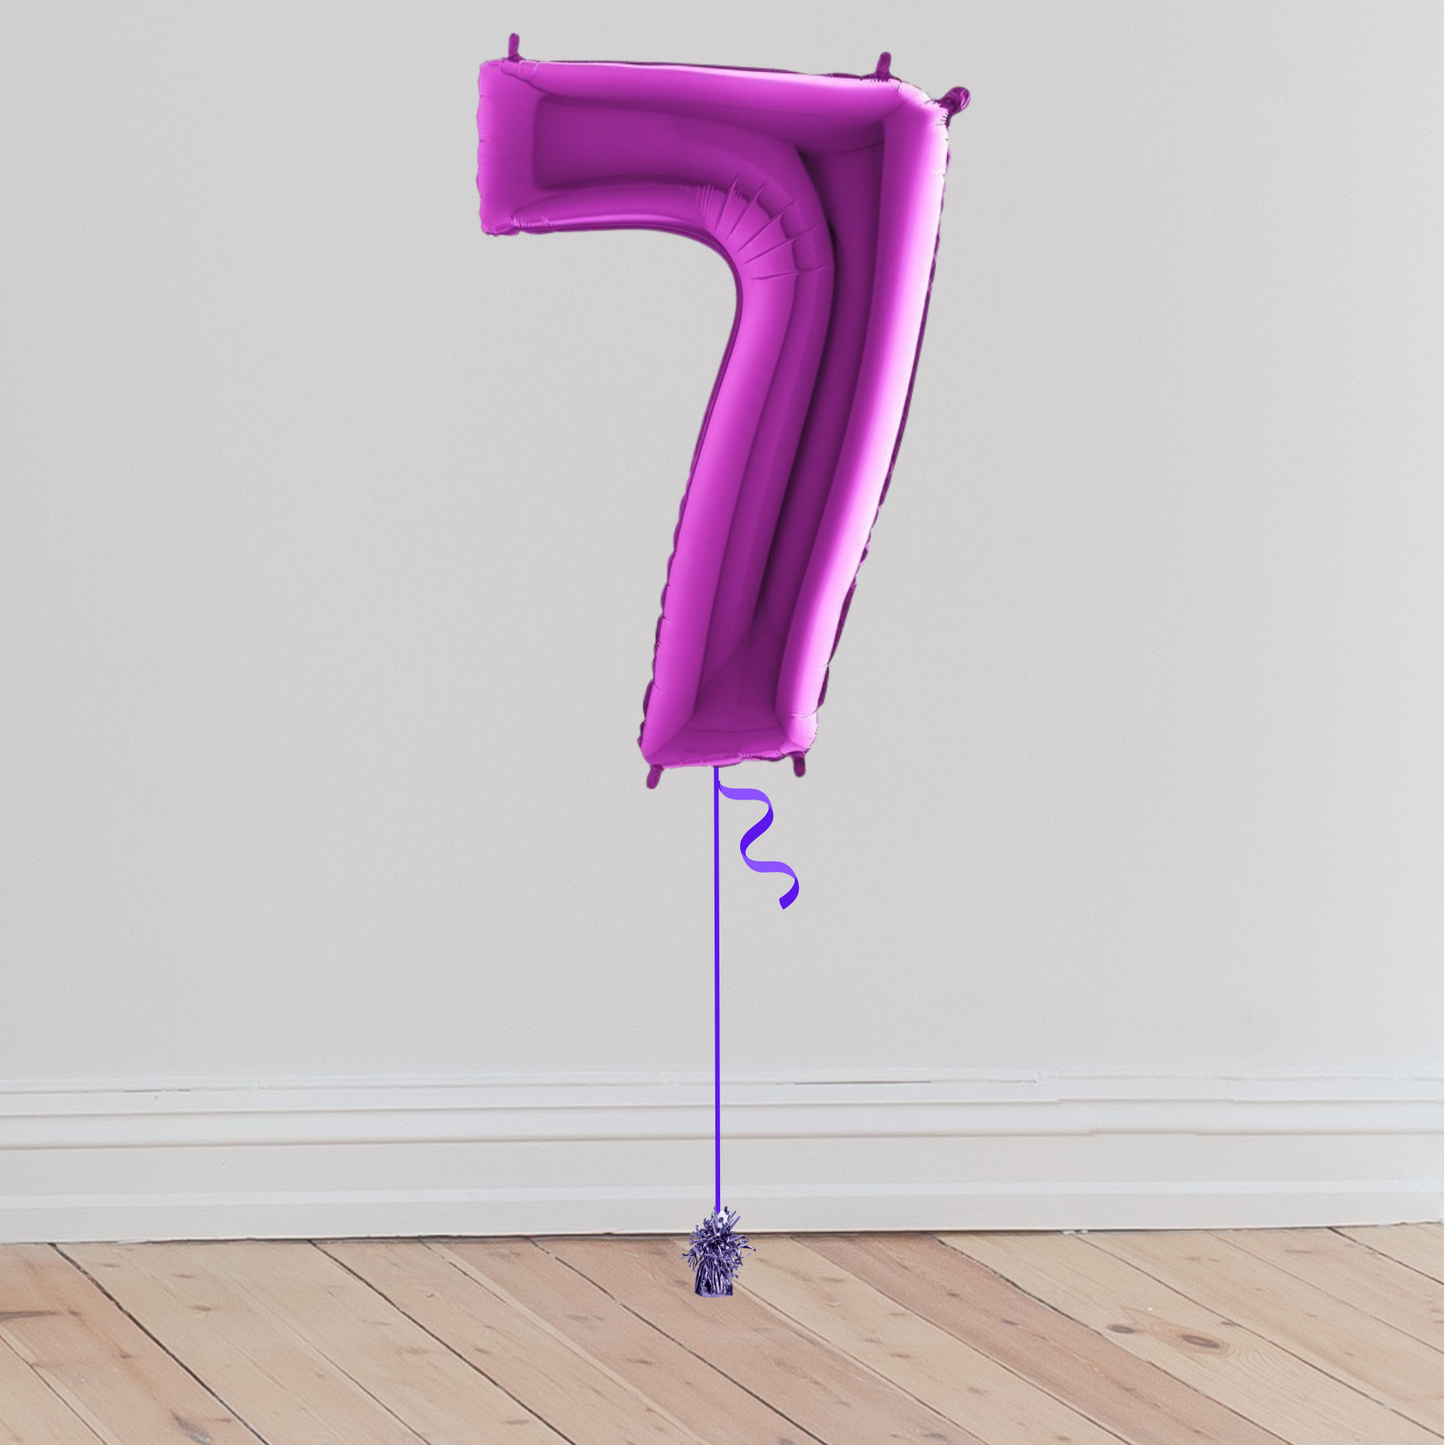 <b> ONLINE EXCLUSIVE </b> <br>Giant Purple Number Balloon <br>(Inflated with Helium & Weight Included)